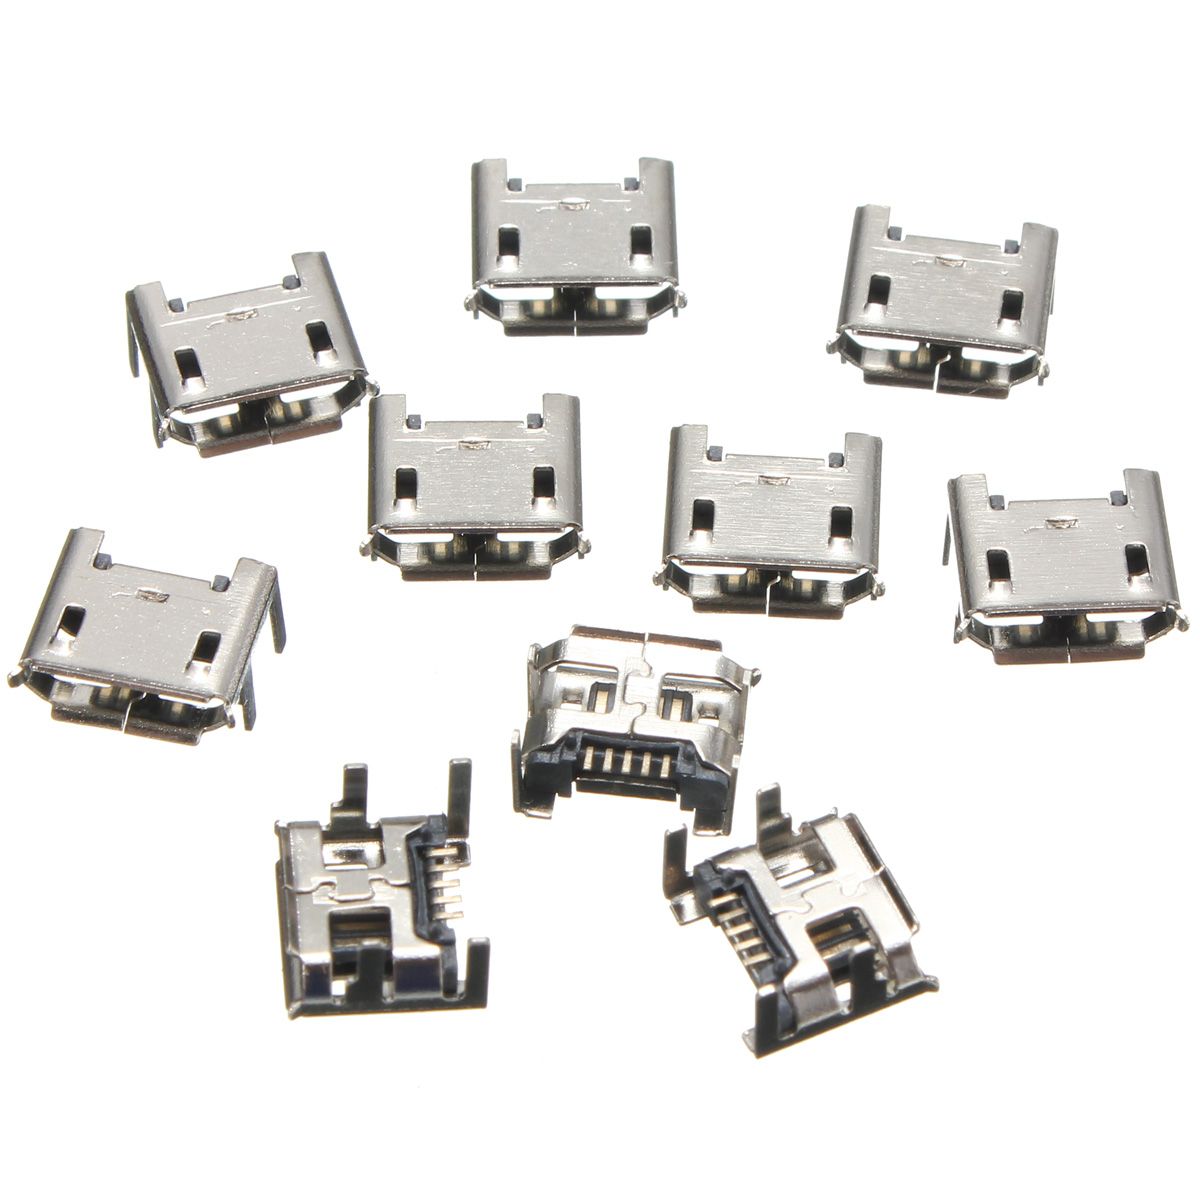 30pcs-Micro-USB-Type-B-5-Pin-Female-Socket-4-Vertical-Legs-For-Solder-Connector-1370518